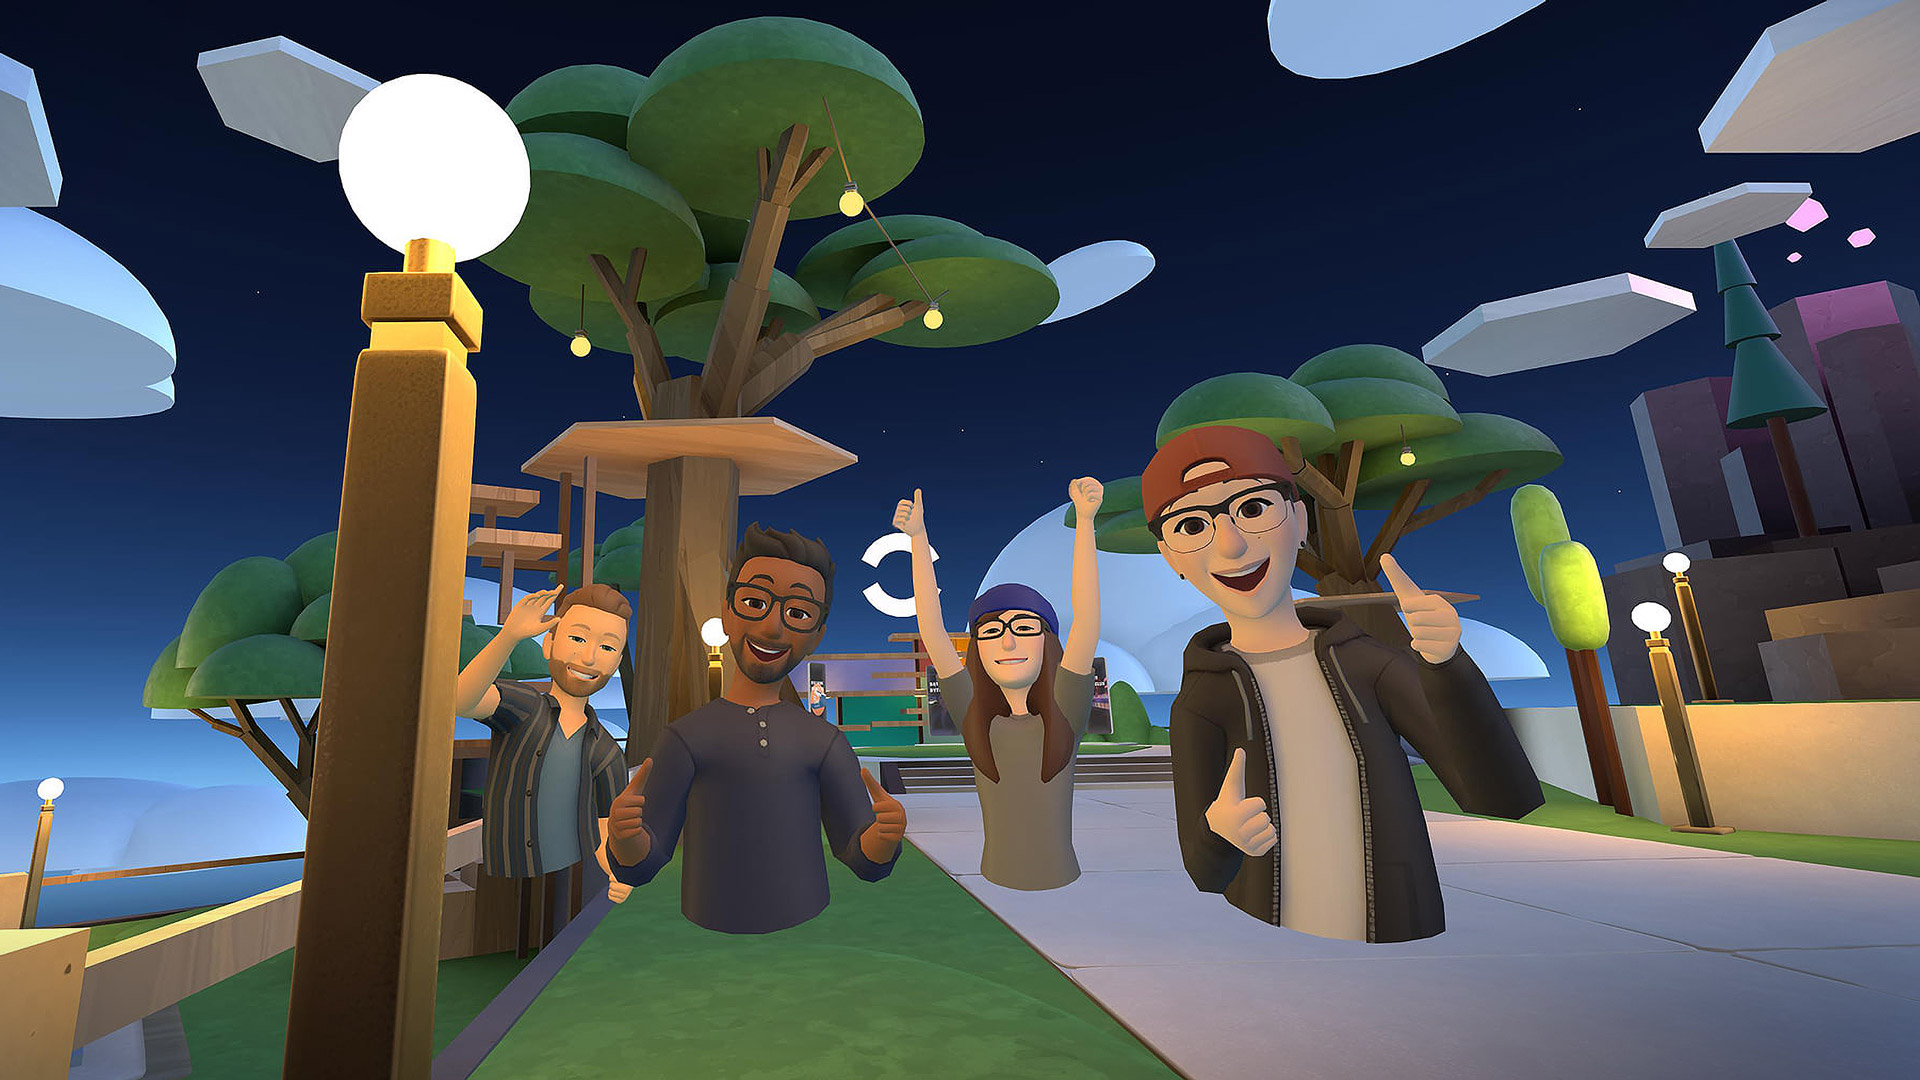 Meta to Open ‘Horizon Worlds’ Social VR Platform to Kids Ages 13+ – Road to VR